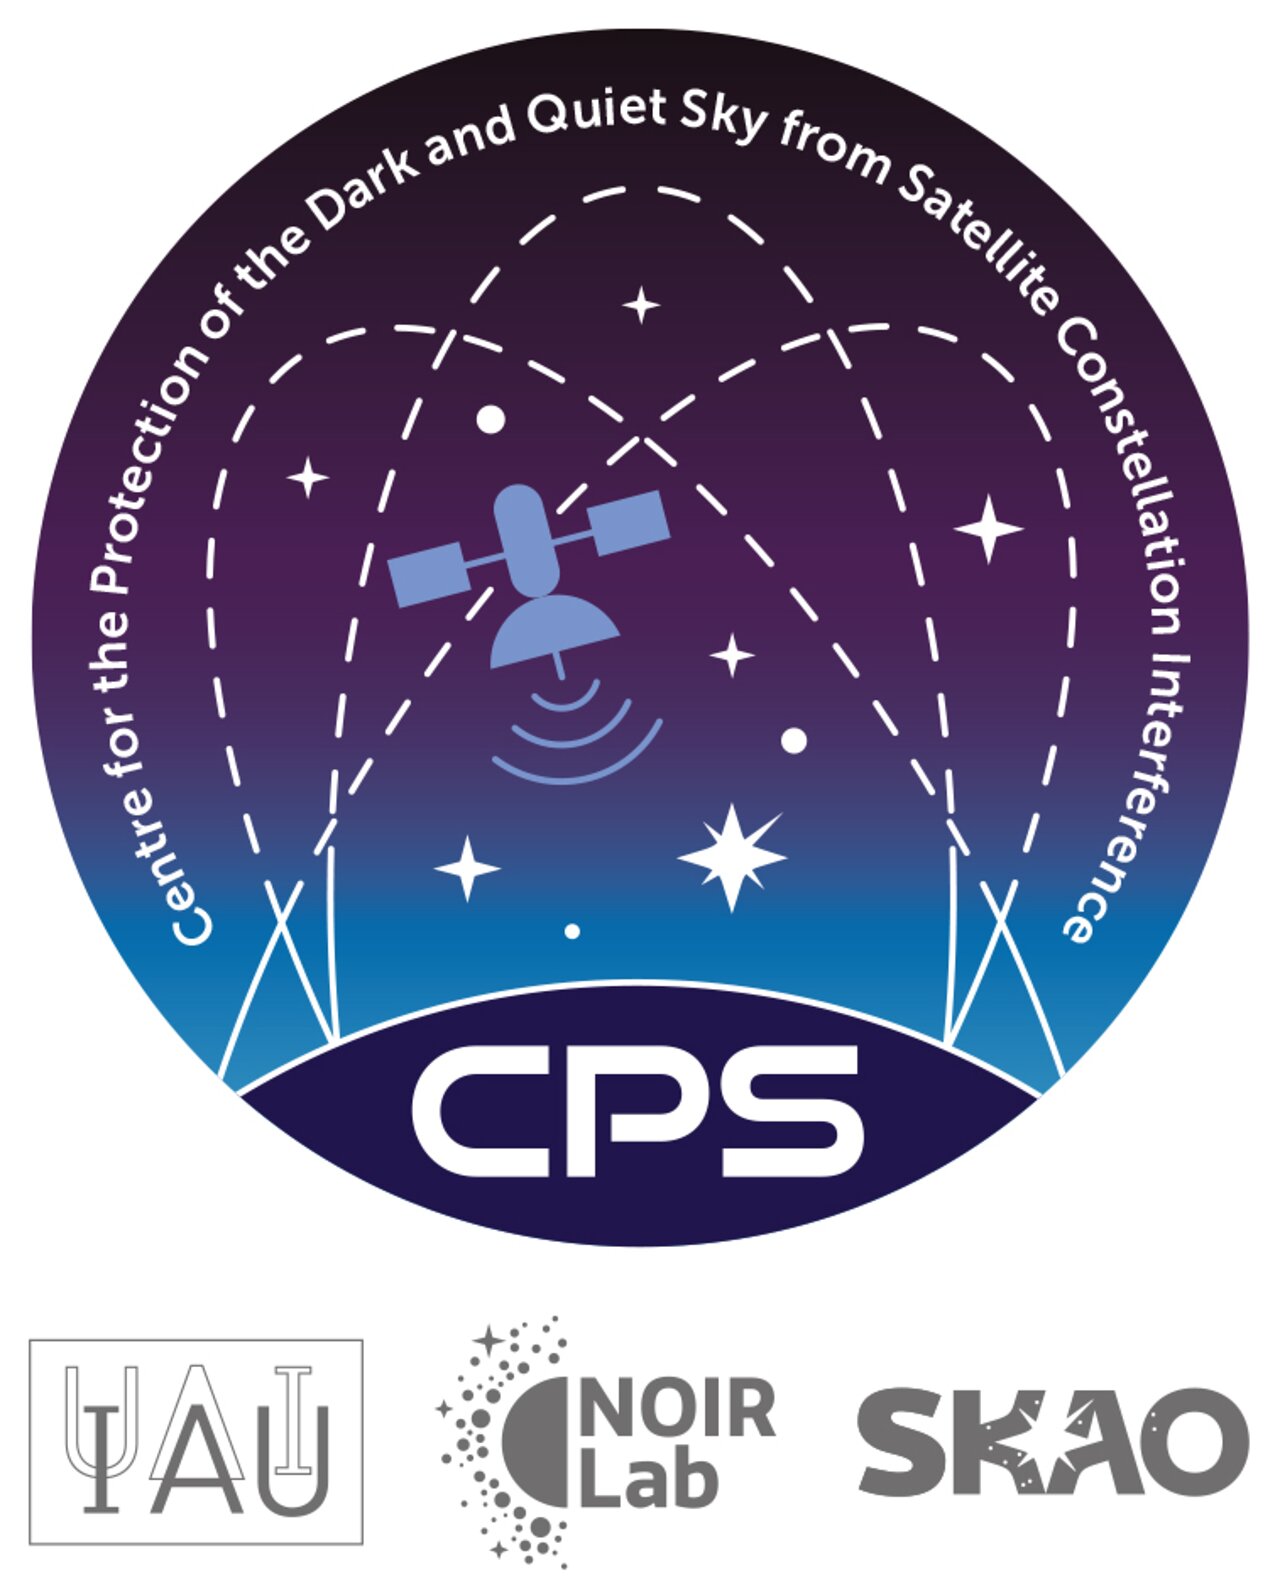 IAU Centre for the Protection of Dark and Quiet Sky from Satellite Constellation Interference Logo